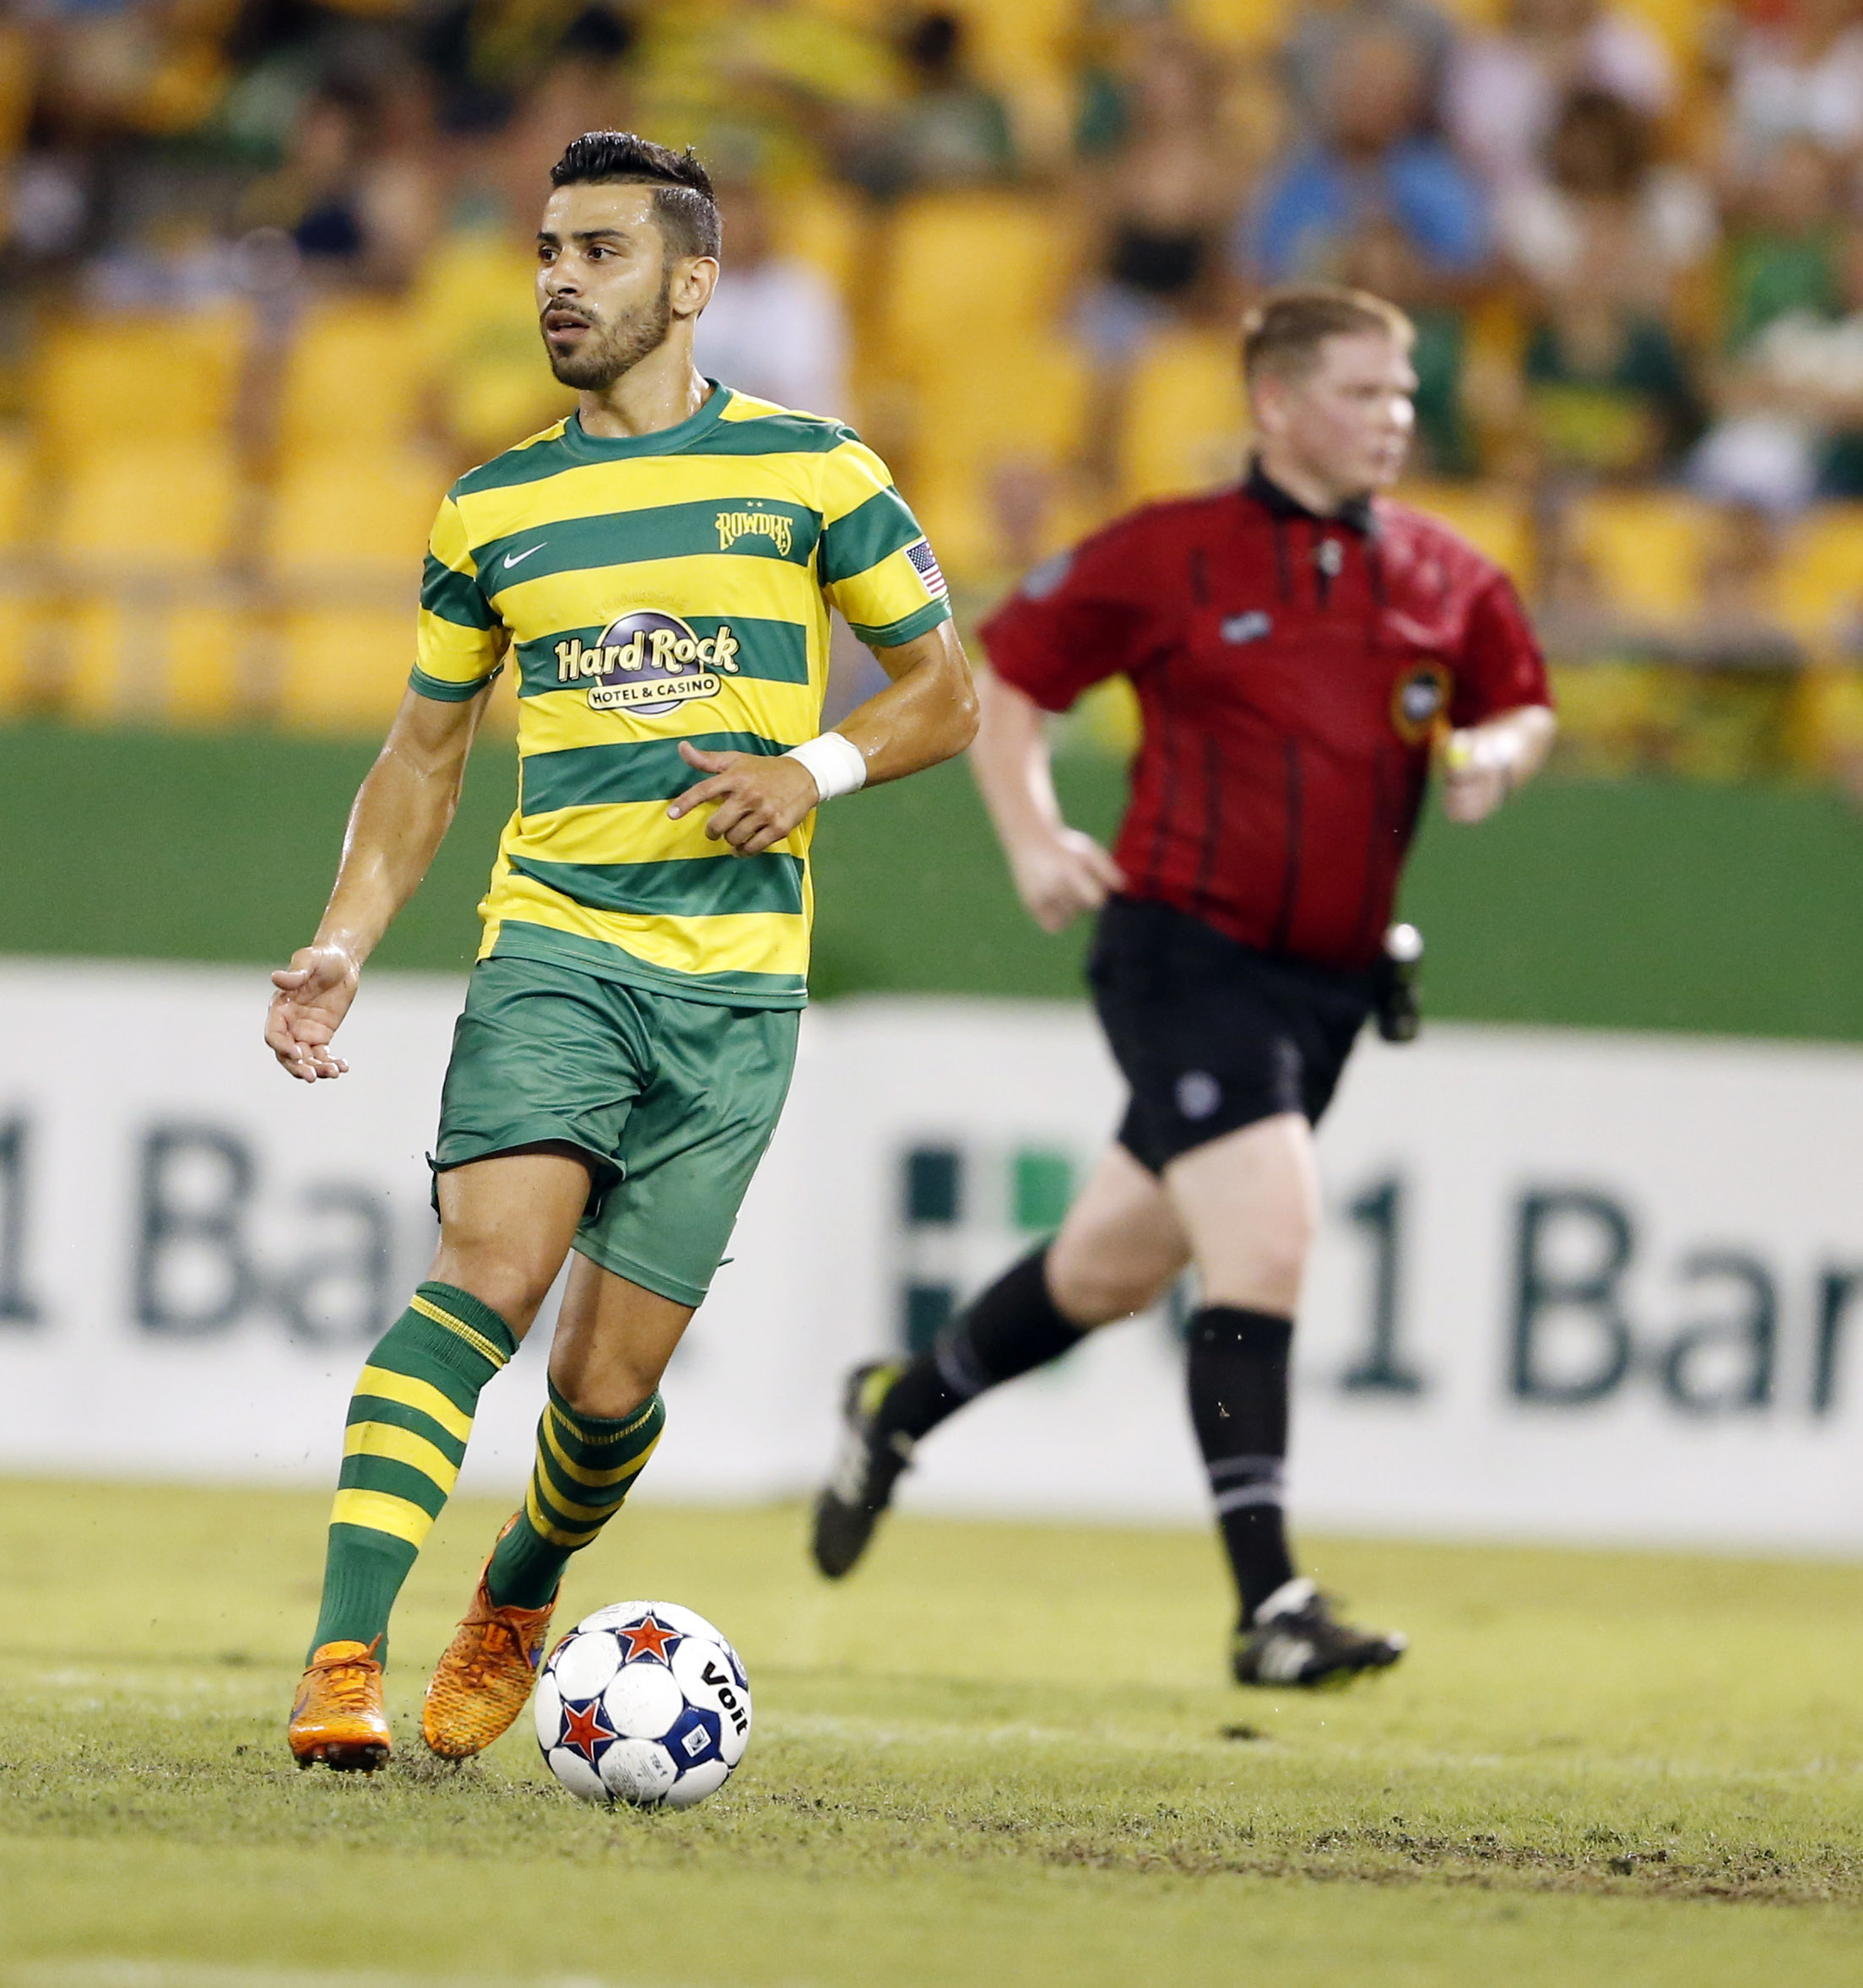 AUGUST 8, 2015 - ST. PETERSBURG, FLORIDA: The Tampa Bay Rowdies match against the Jacksonville Armada at Al Lang Field on Saturday August 8, 2015. The Rowdies won the match 3-2. Photo by Matt May/Tampa Bay Rowdies